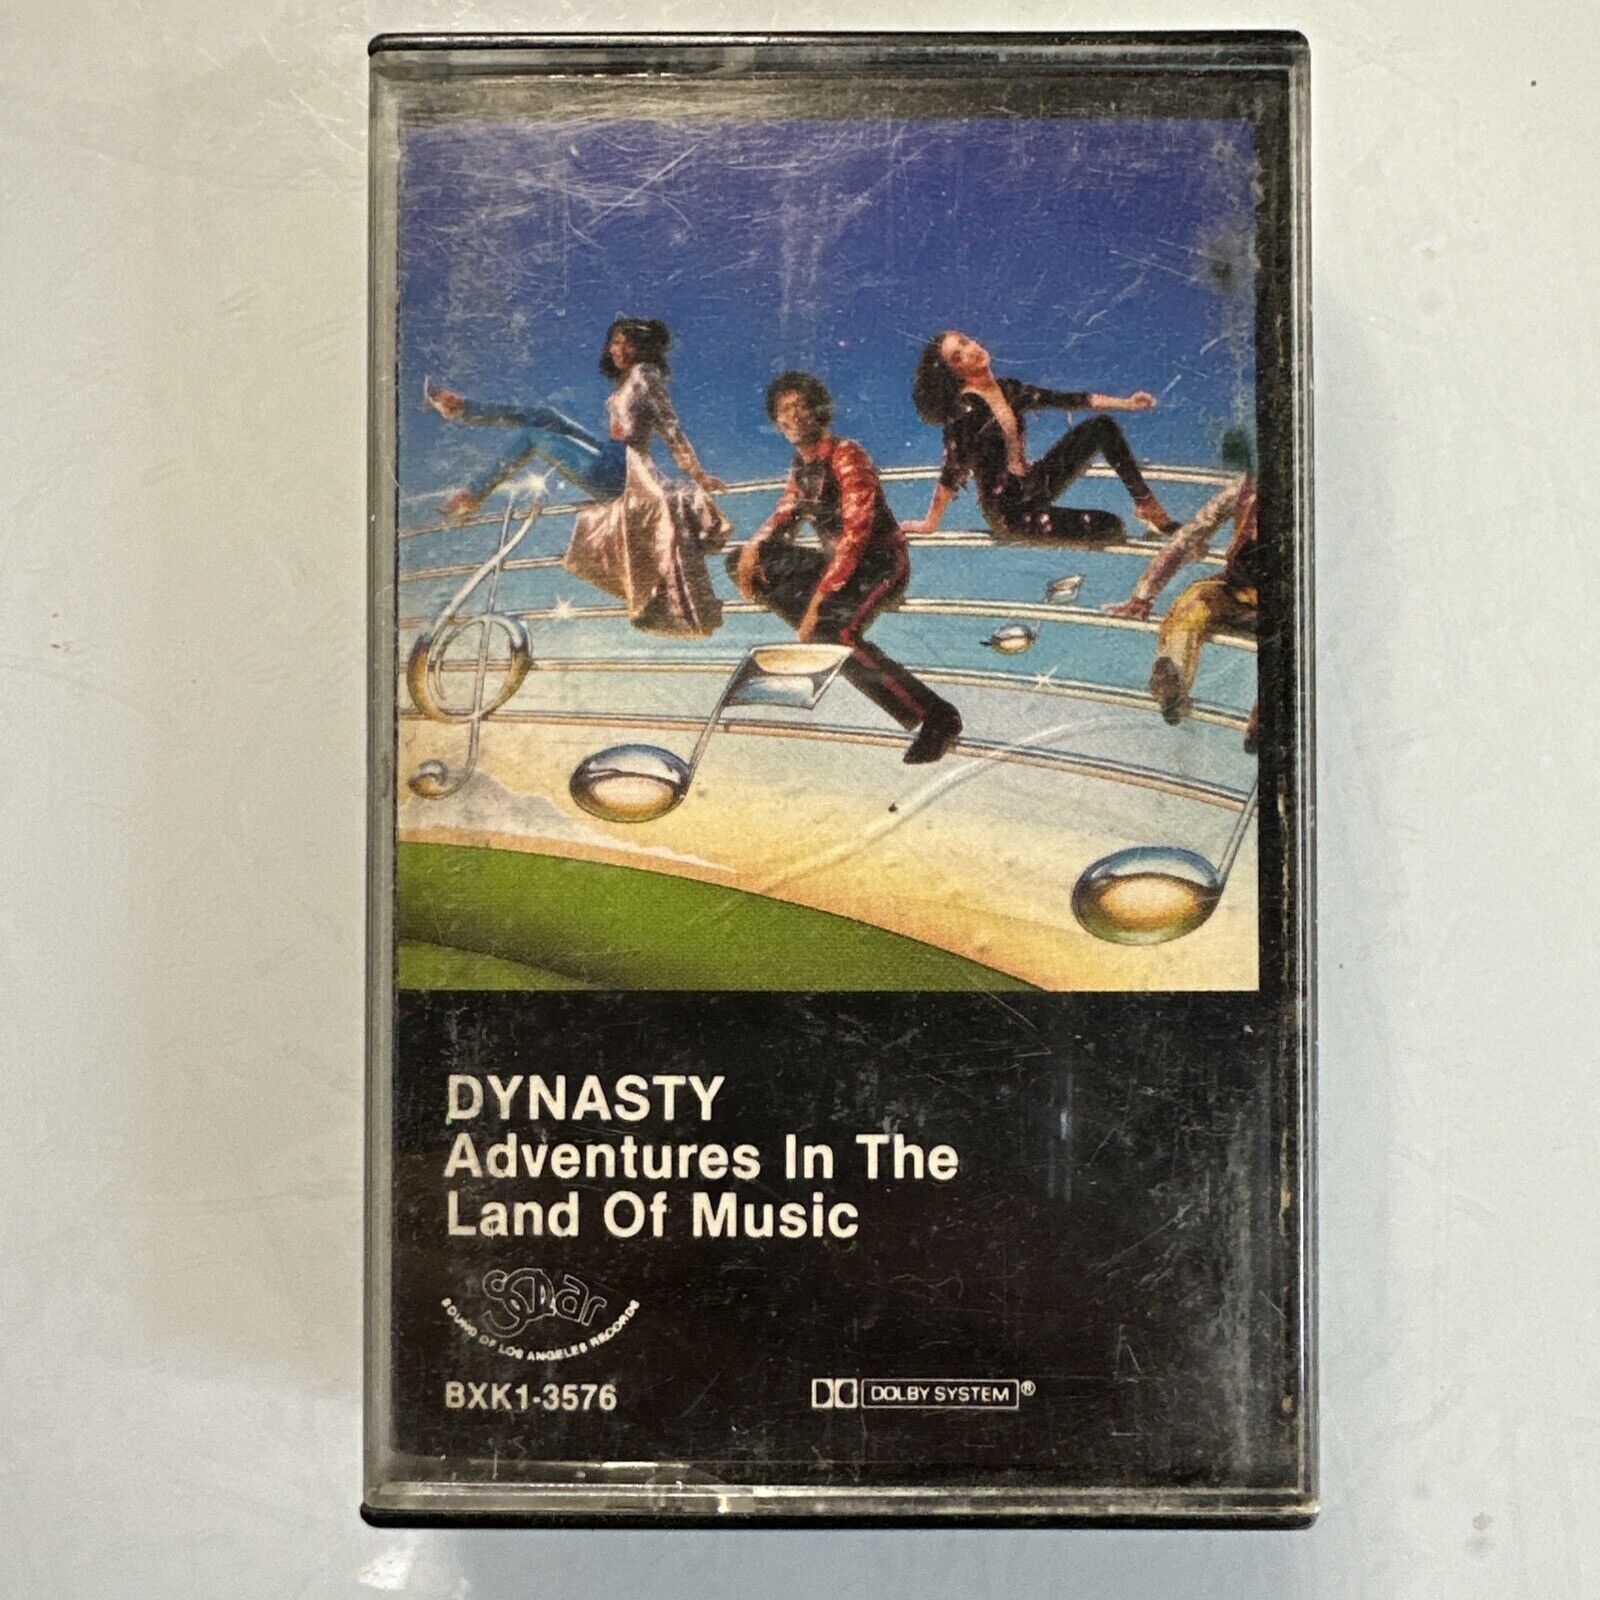 Dynasty Adventures In The Land of Music (Cassette)